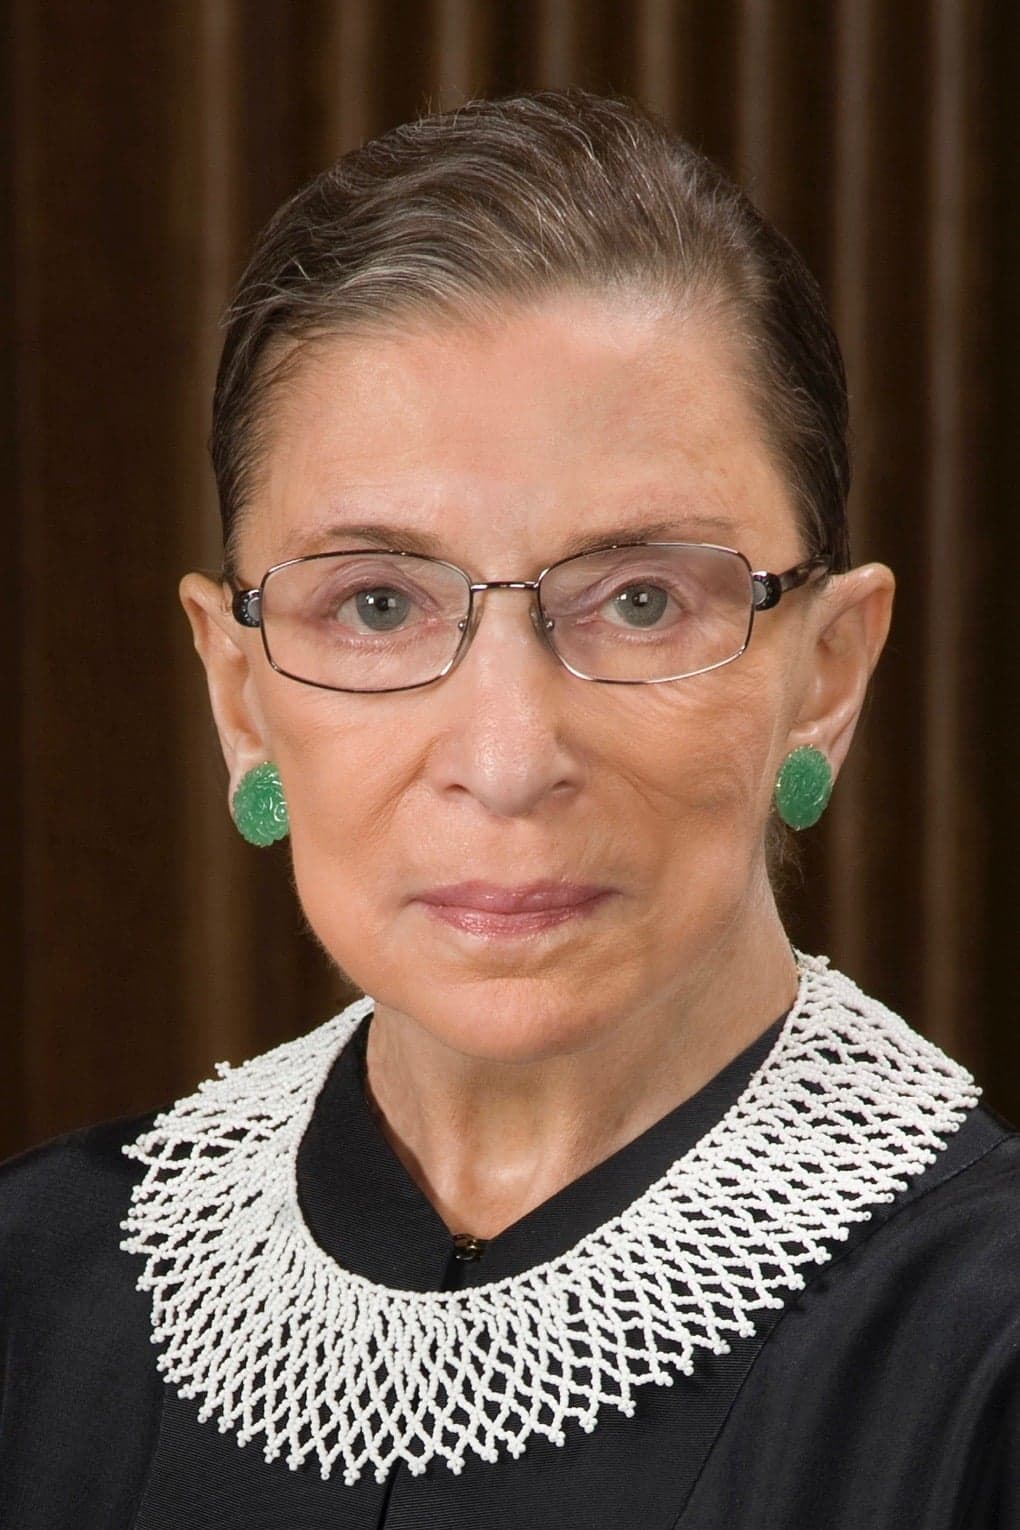 Ruth Bader Ginsburg | Self (archive footage) (uncredited)